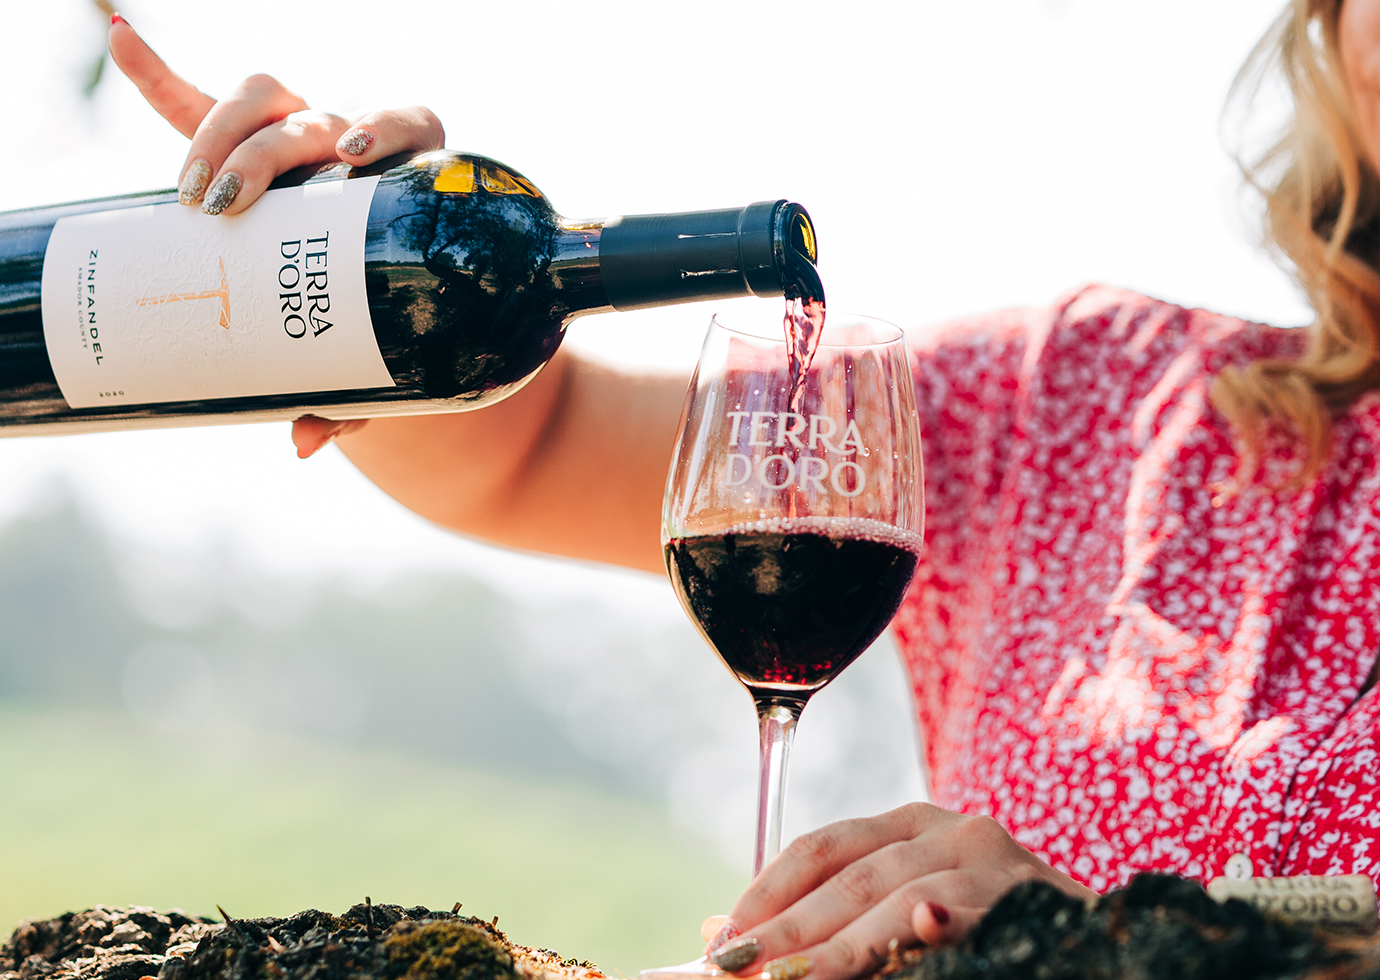 Woman pouring from a bottle of Terra d'Oro zinfandel into a glass outside on a tree branch